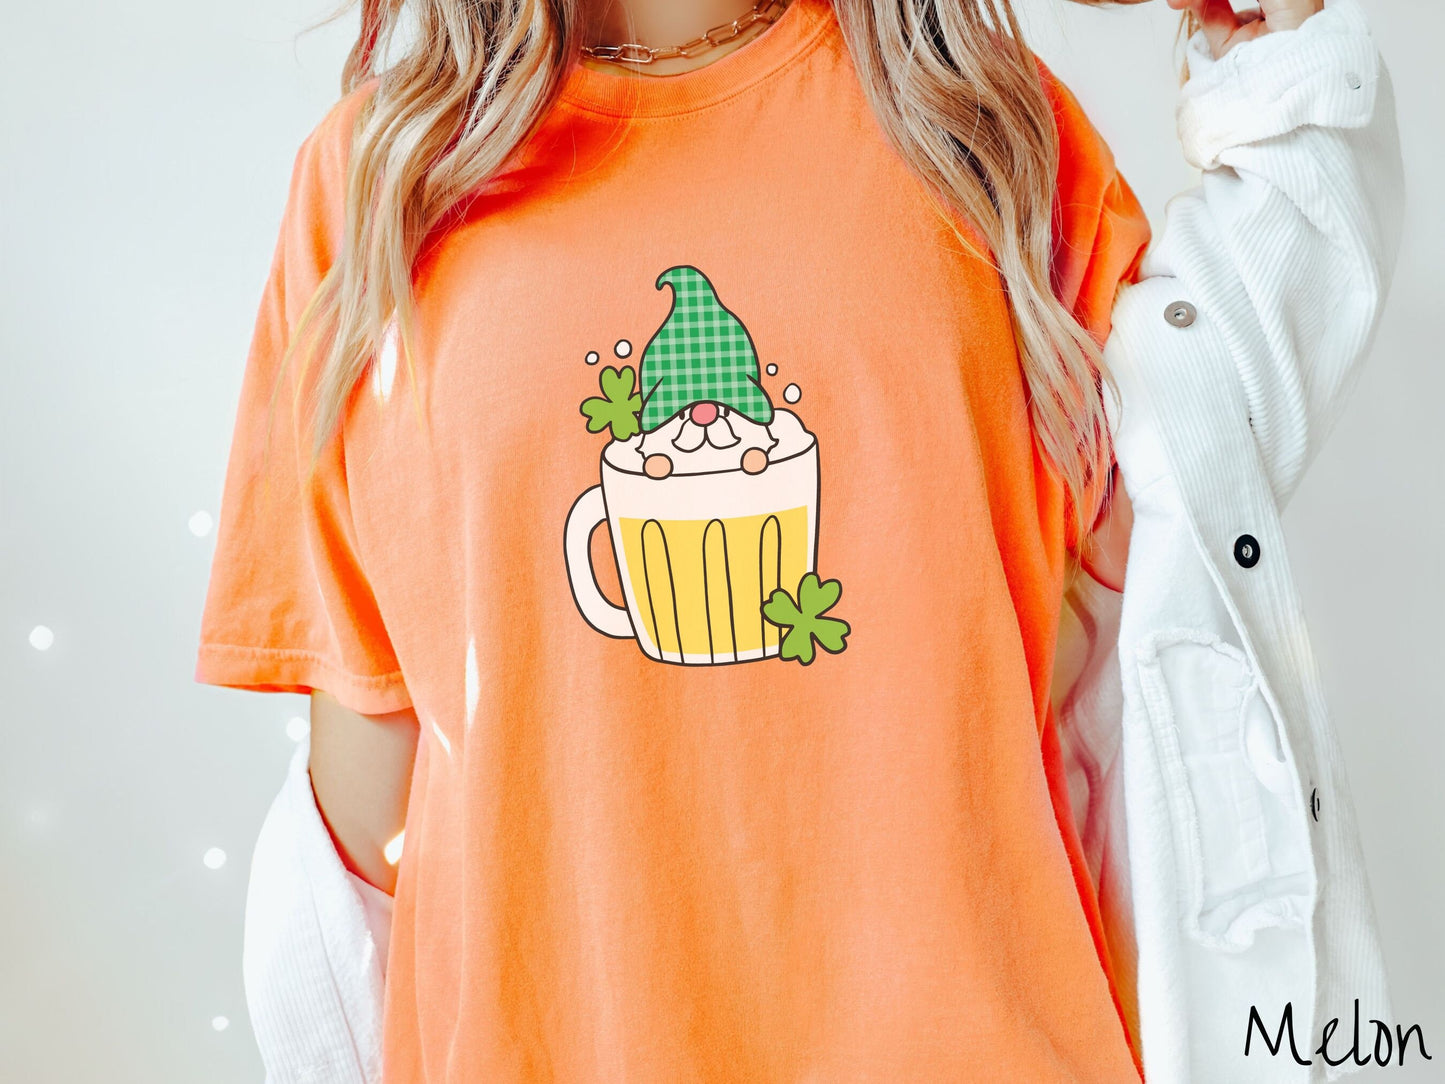 A woman wearing a vintage, melon colored shirt with a beer filled mug in the center with a green hat wearing gnome peeking over the top of the glass and green clovers in the background.